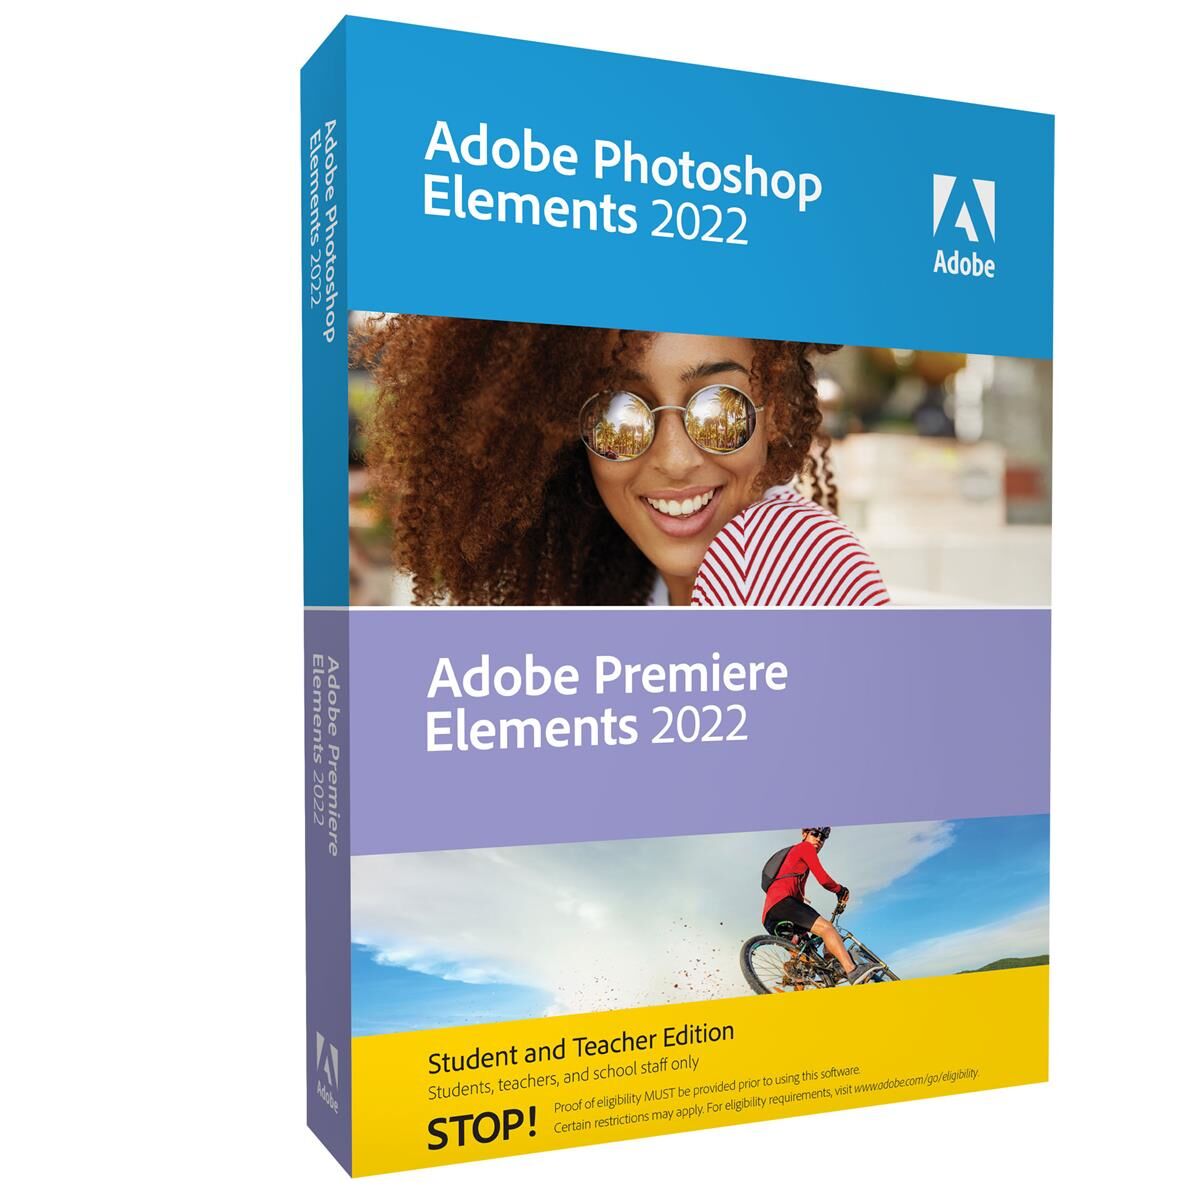 Adobe Photoshop and Premiere Elements 2022 Student/Teacher Edition Software, DVD